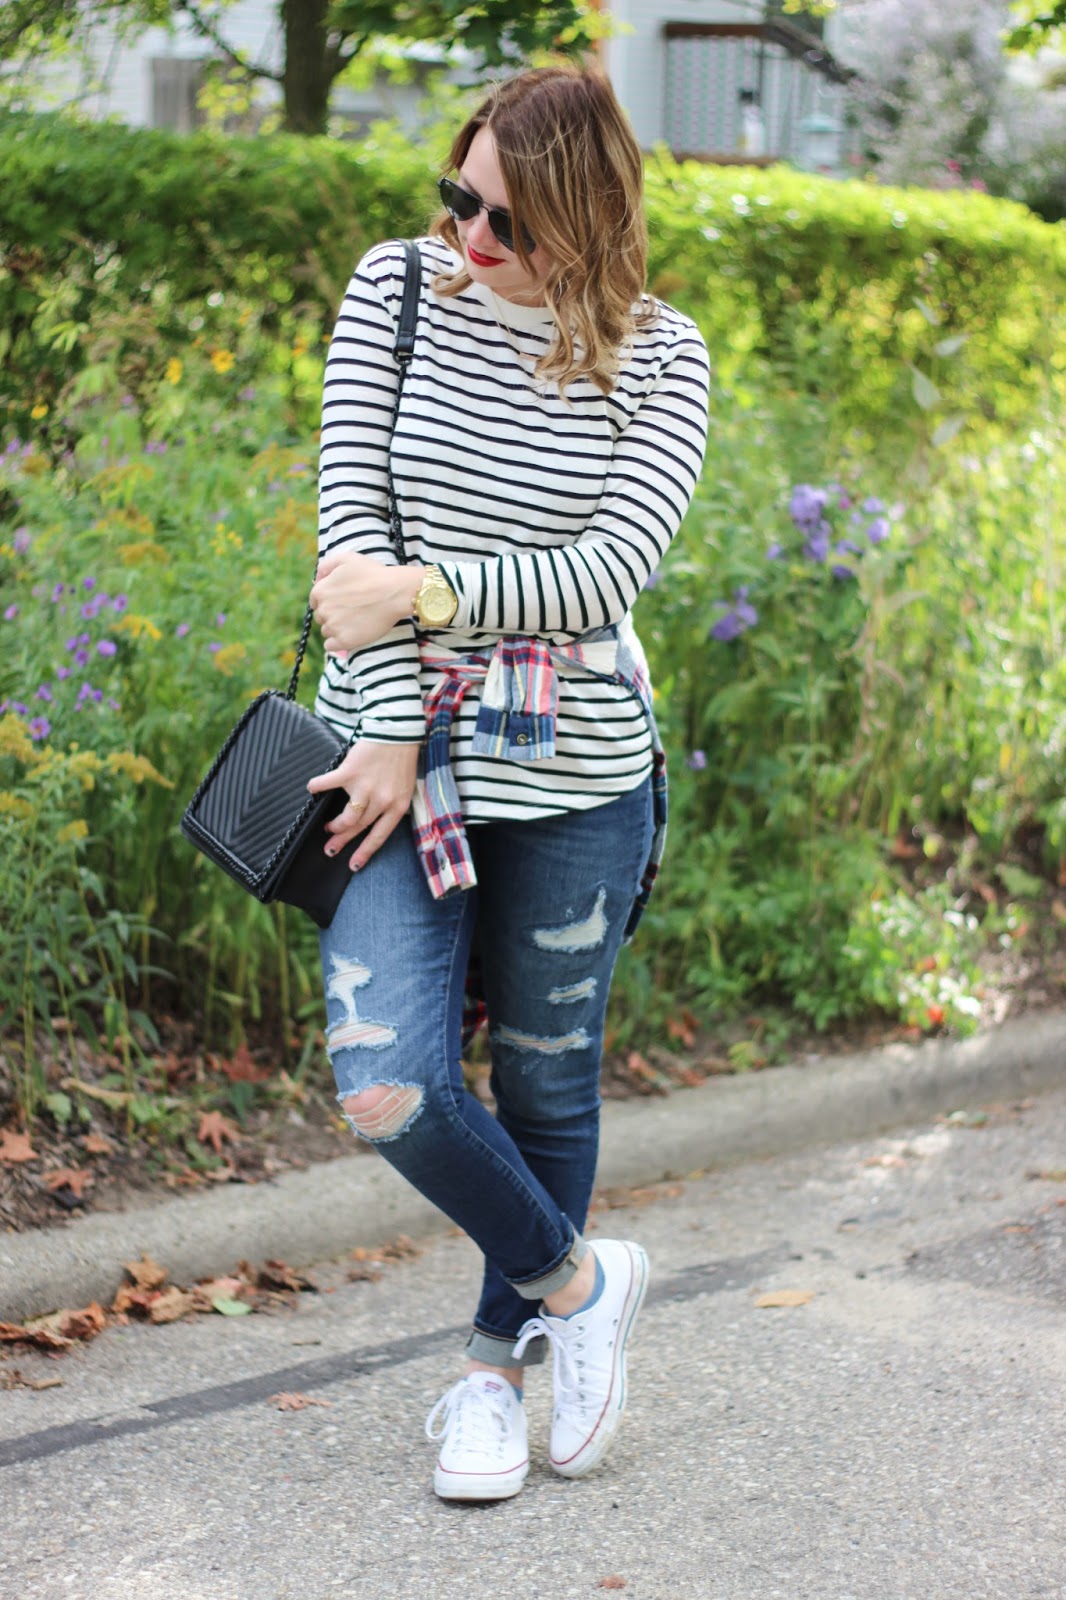 The Black Barcode: Stripes With a Little Plaid